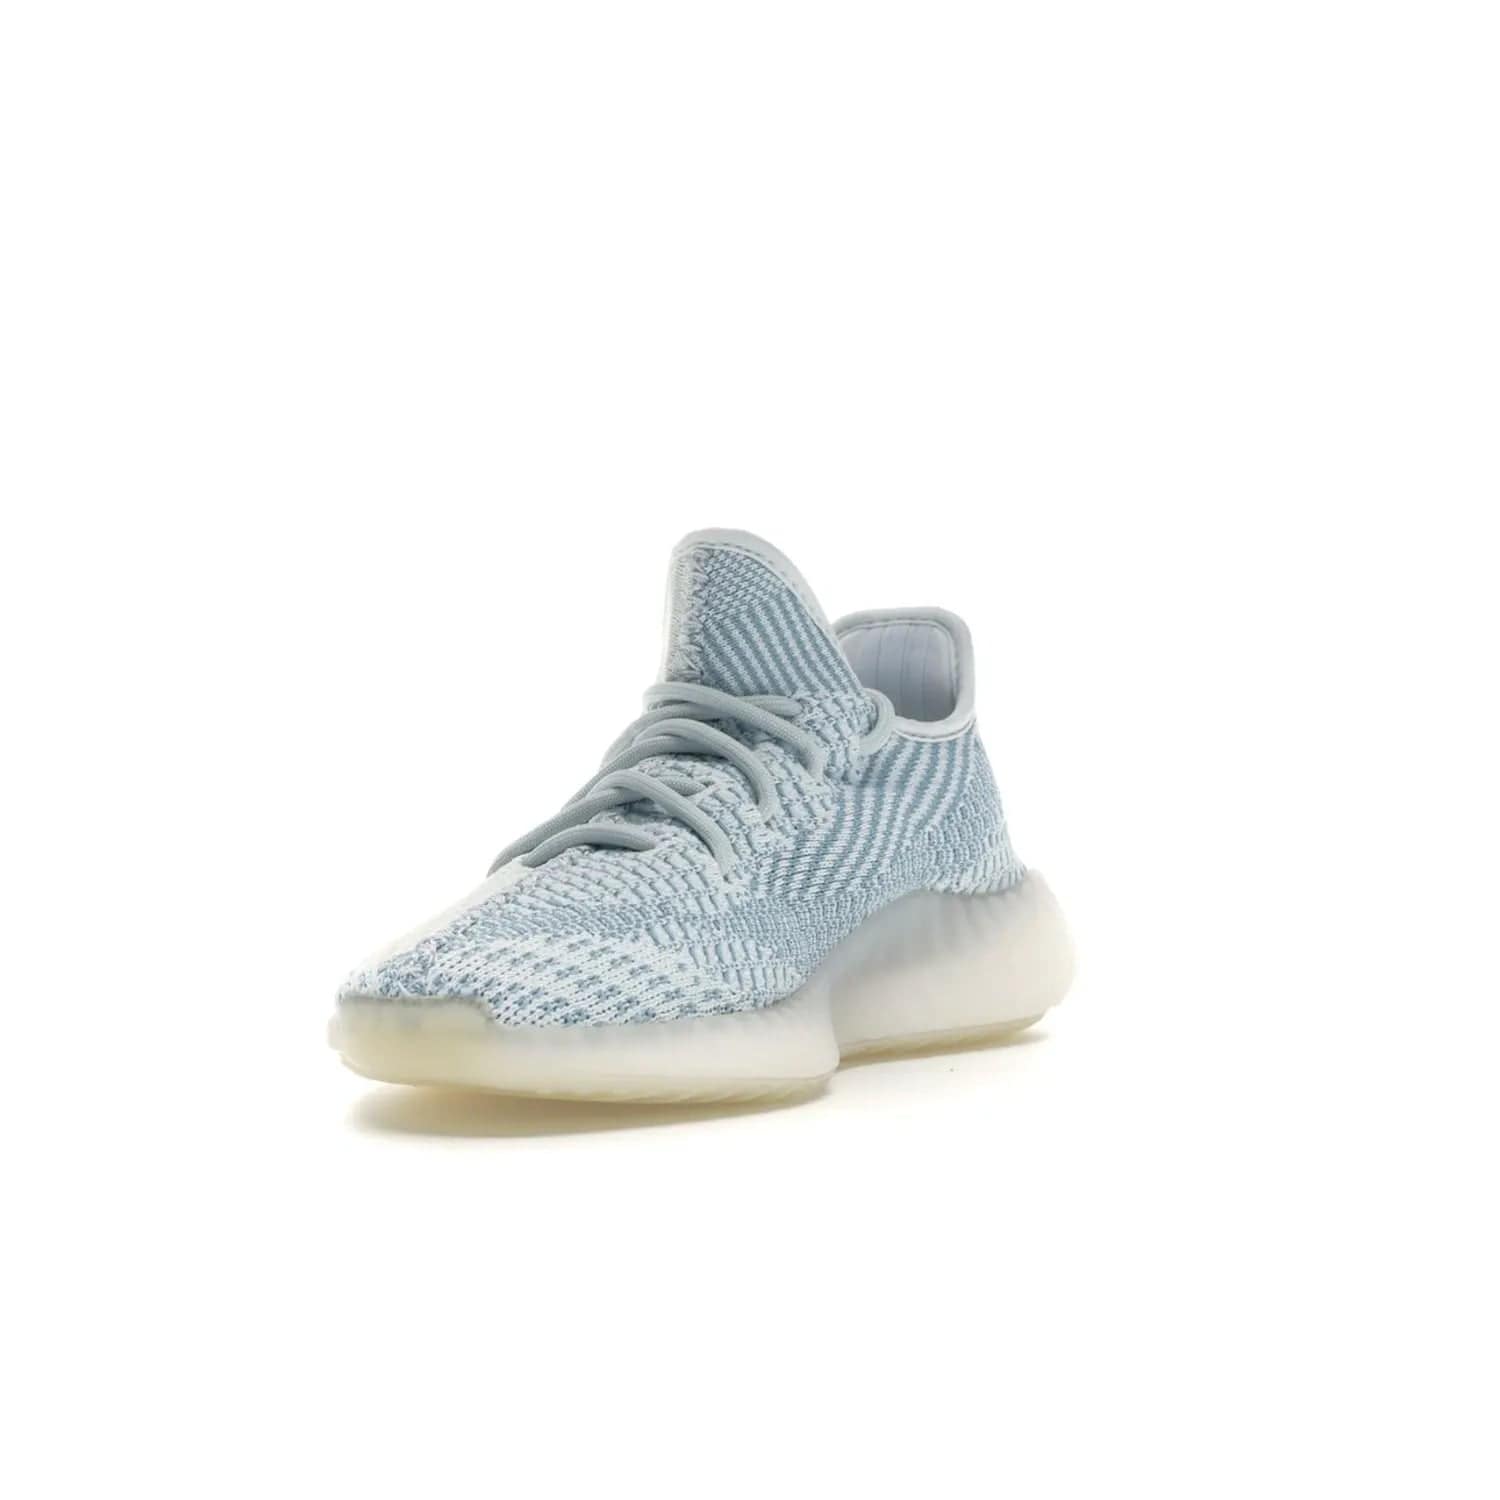 adidas Yeezy Boost 350 V2 Cloud White (Non-Reflective) - Image 13 - Only at www.BallersClubKickz.com - Uniquely designed adidas Yeezy Boost 350 V2 Cloud White (Non-Reflective) with a Primeknit upper in shades of cream and blue with a contrasting hard sole. A fashion-forward sneaker with a transparent strip and blue-and-white patterns.